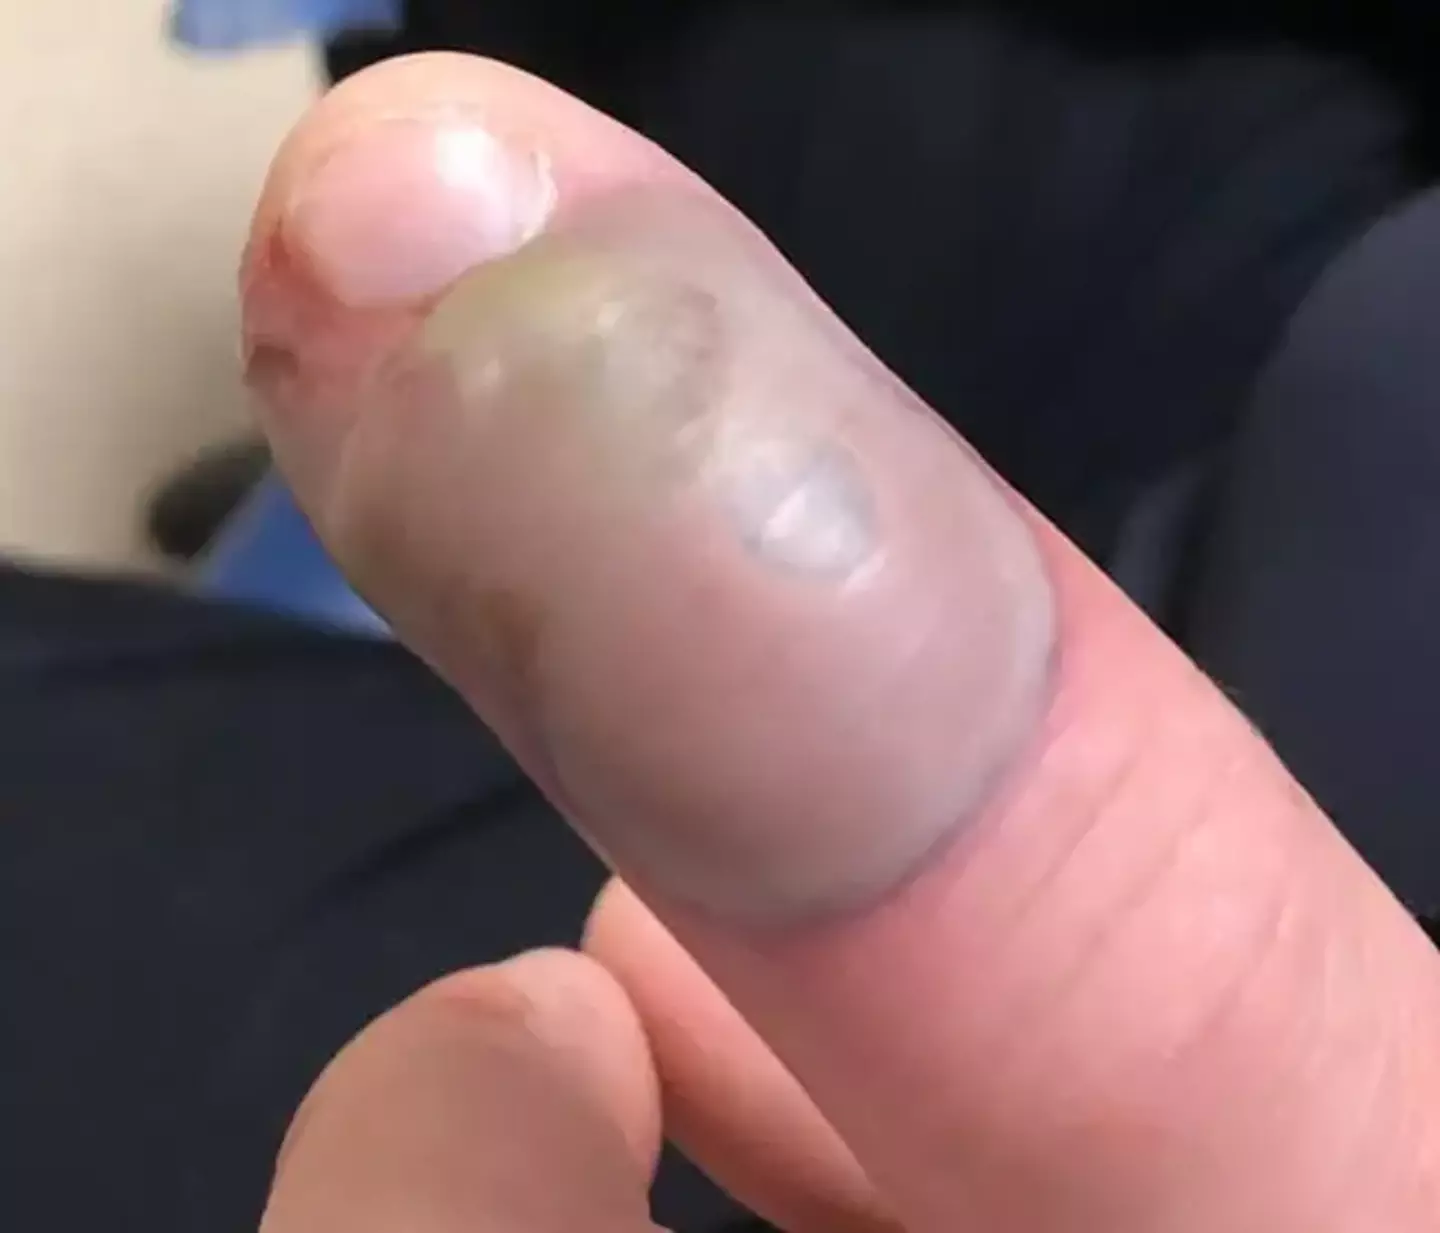 There are measures you can take to make sure your fingernails don't end up like this.